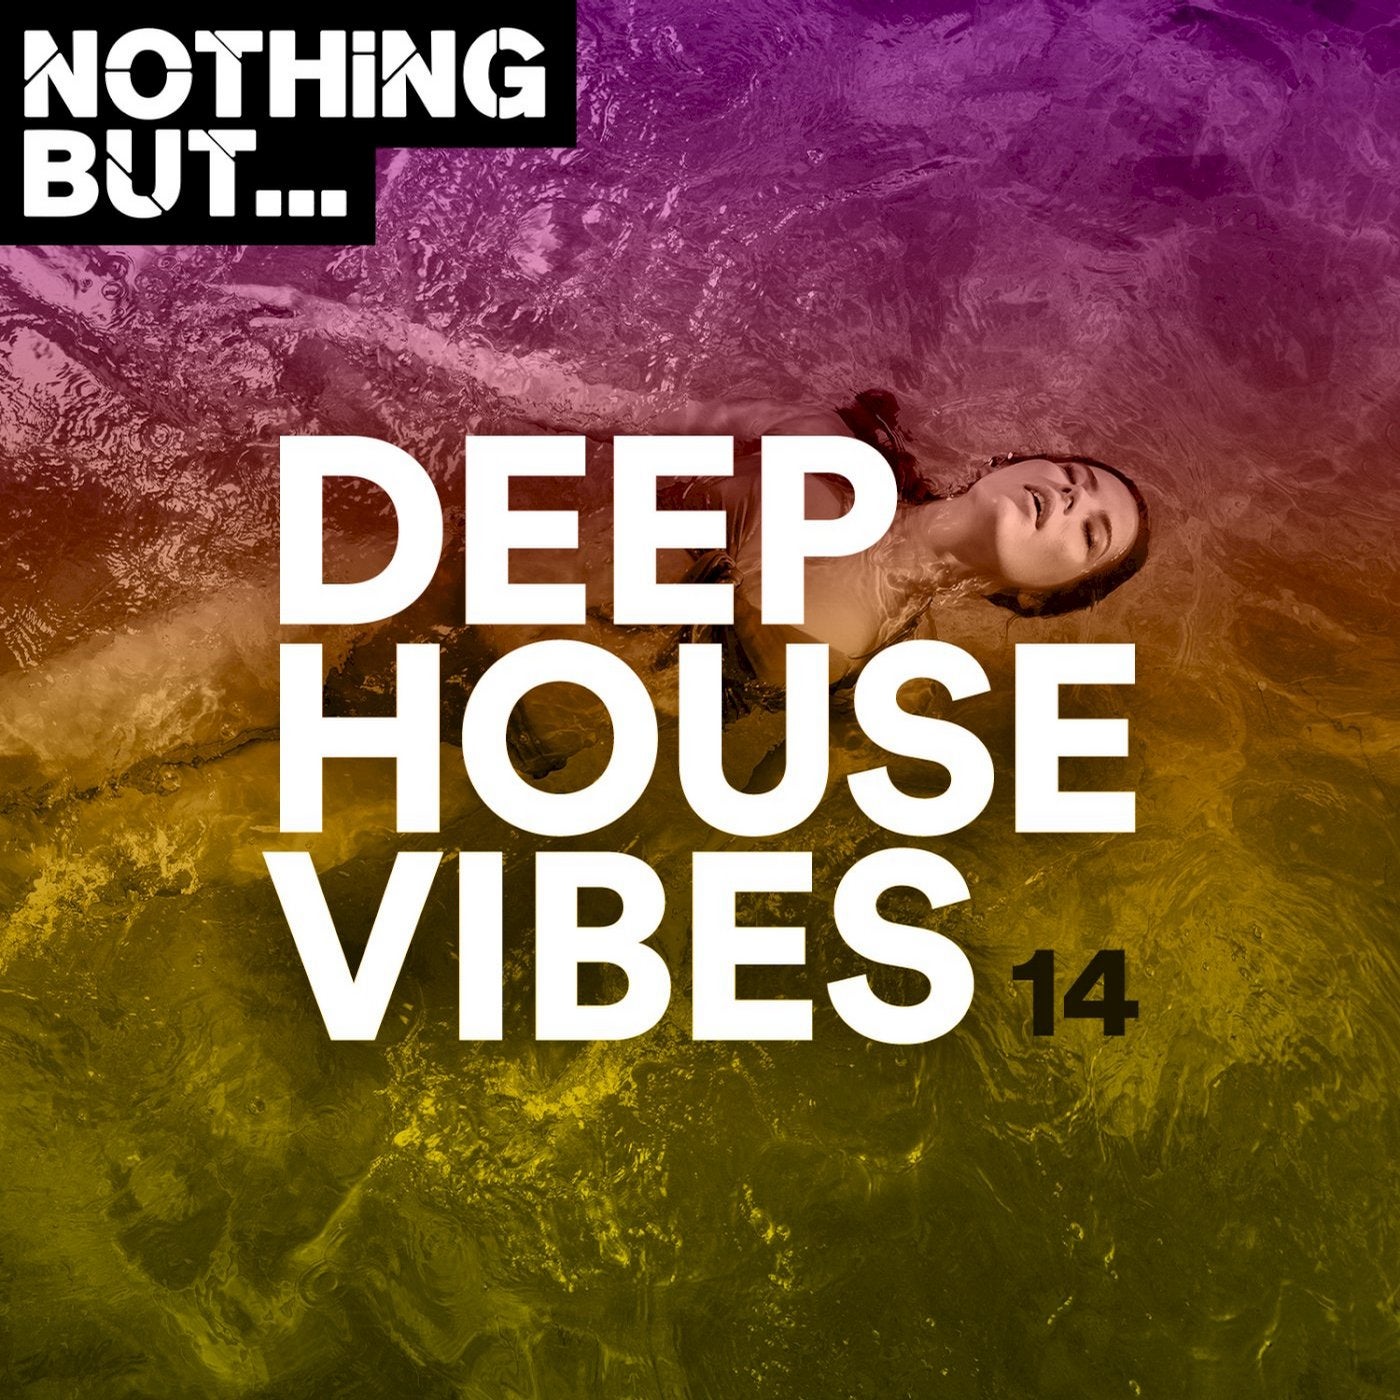 Nothing But... Deep House Vibes, Vol. 14